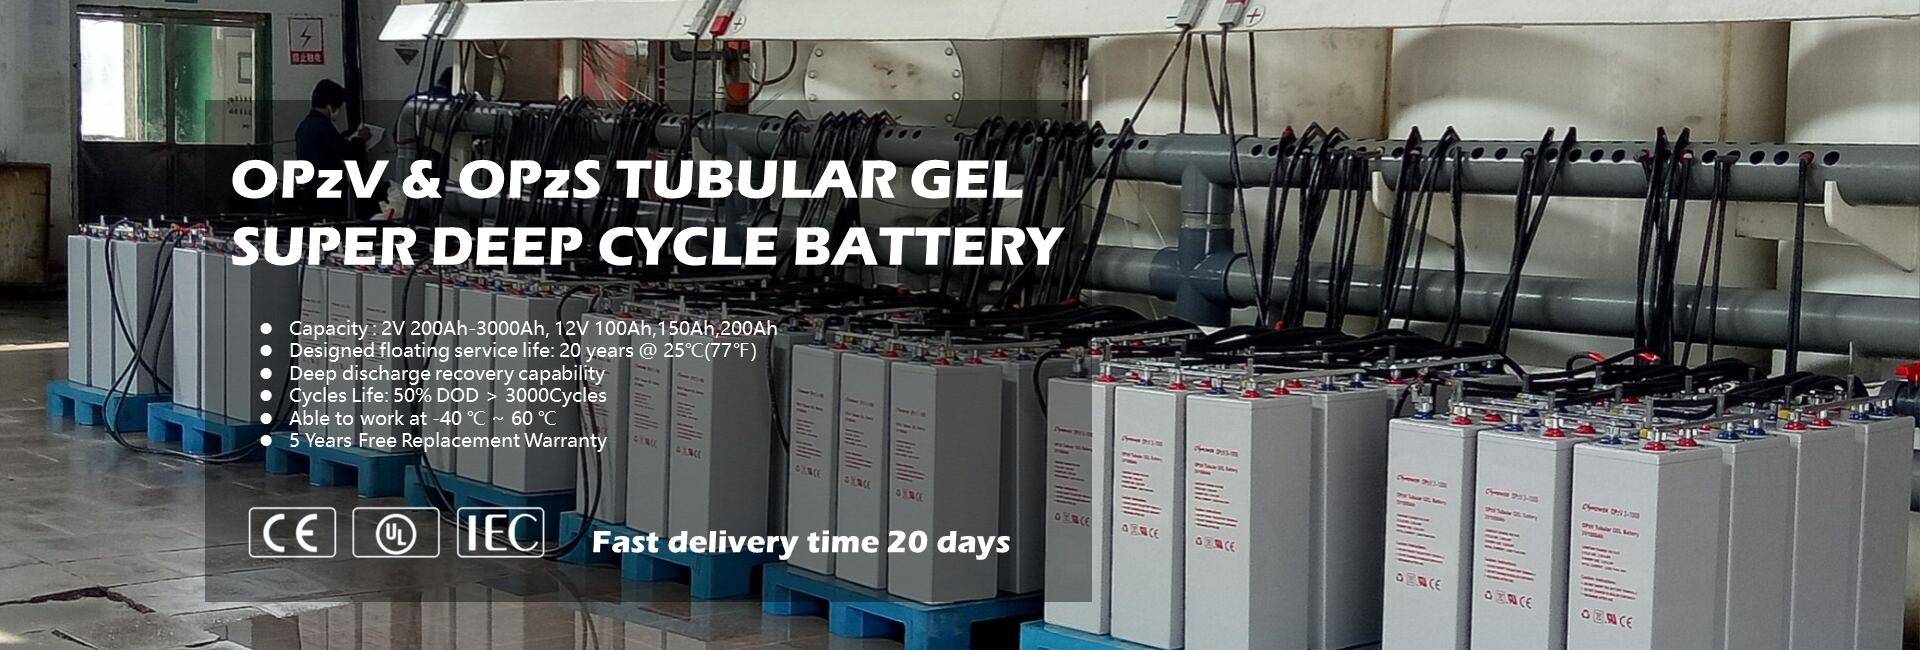 Super deep cycle Tubular OPZV OPZS Battery